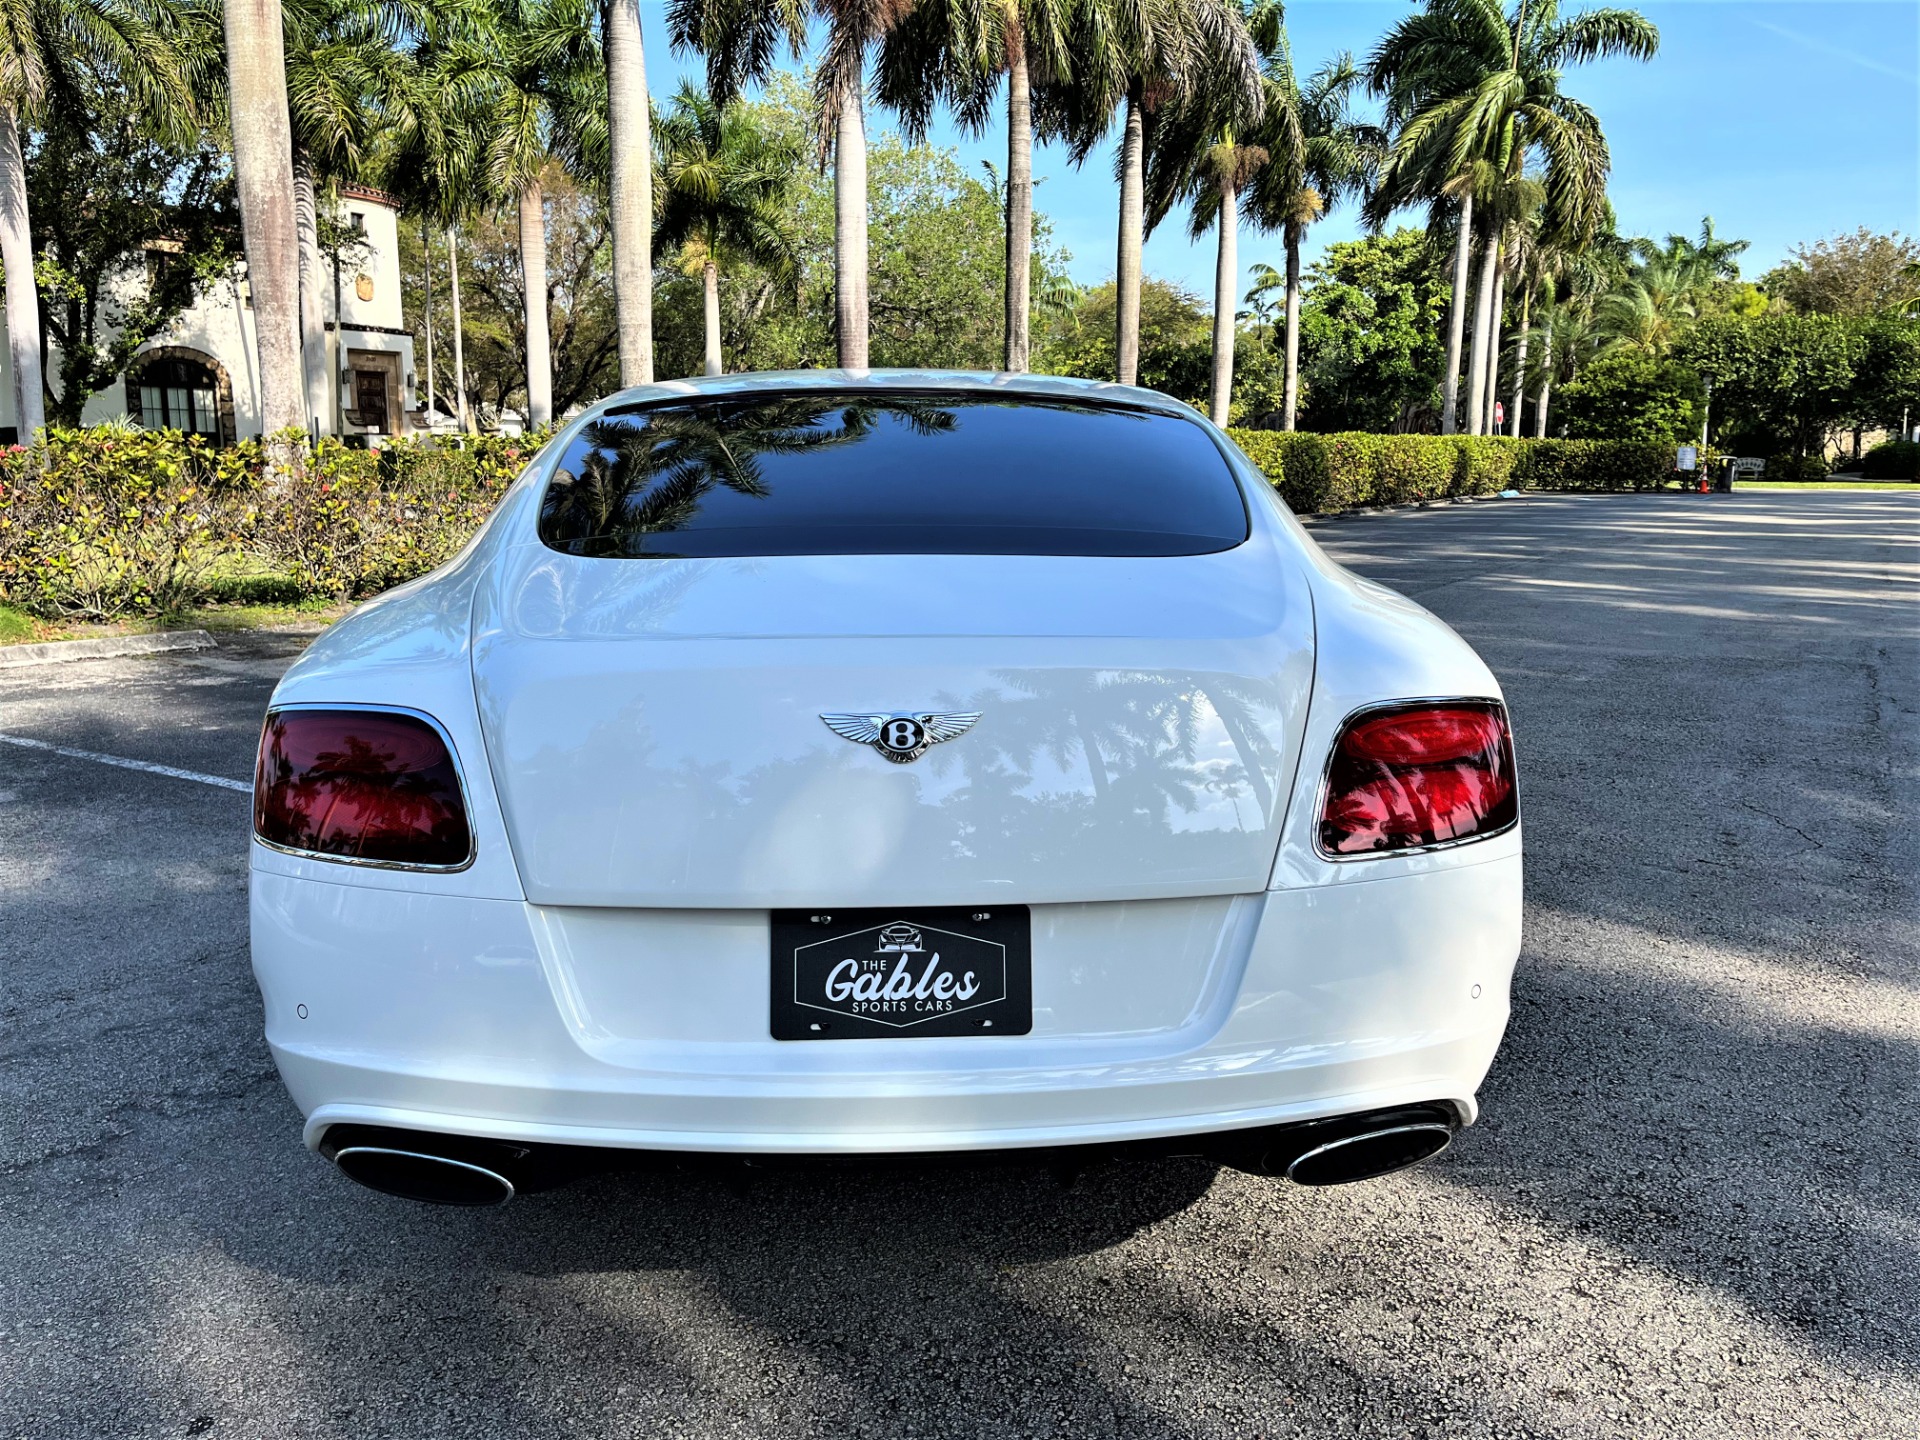 Used 2015 Bentley Continental GT Speed for sale Sold at The Gables Sports Cars in Miami FL 33146 3